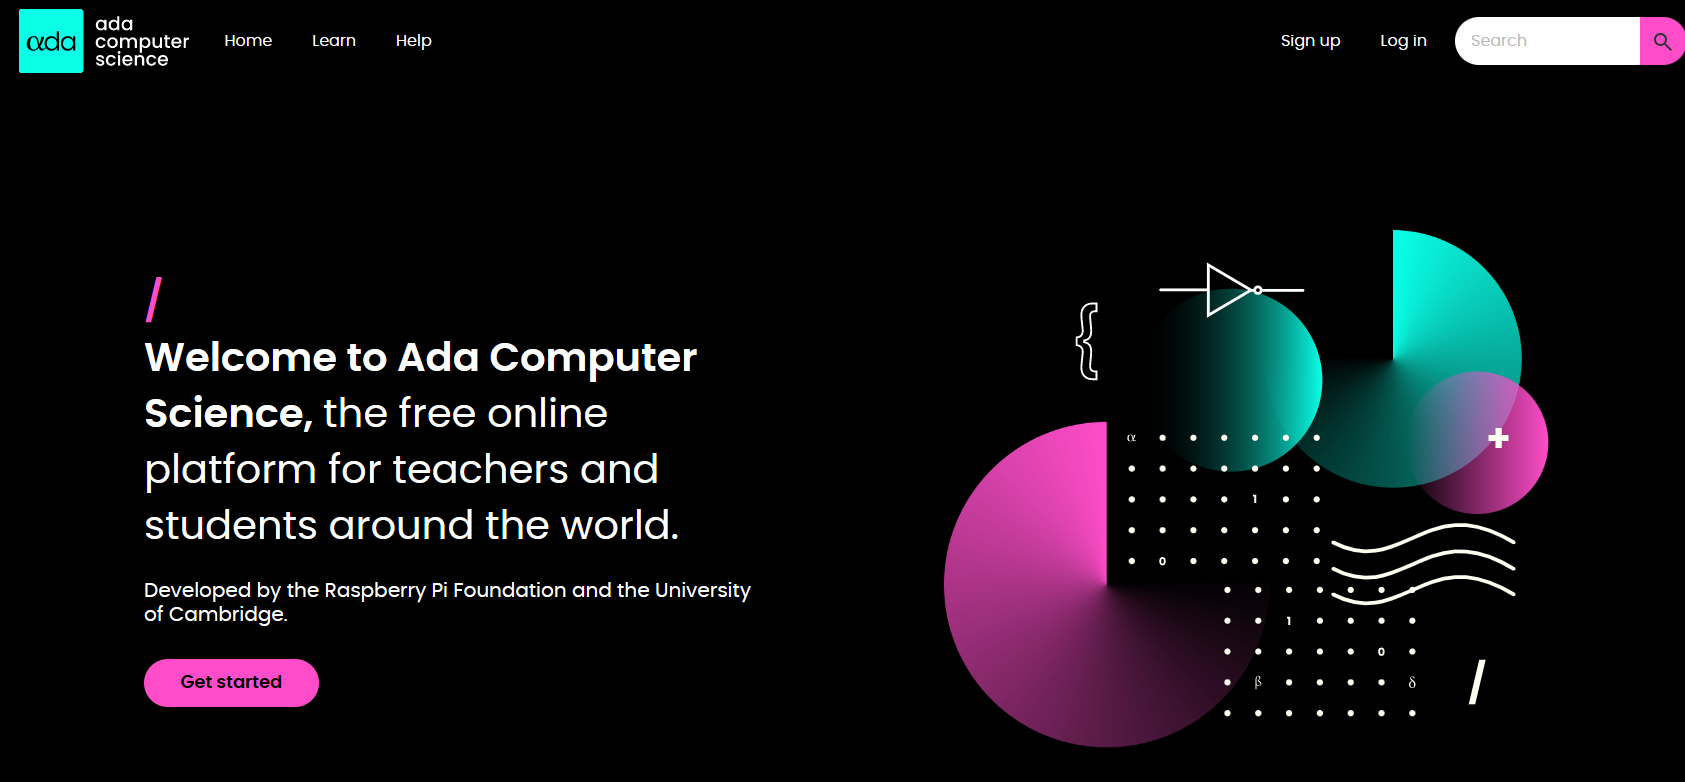 Ada Computer Science is a free online platform for teachers and students around the world, developed by the Raspberry Pi Foundation and the University of Cambridge.